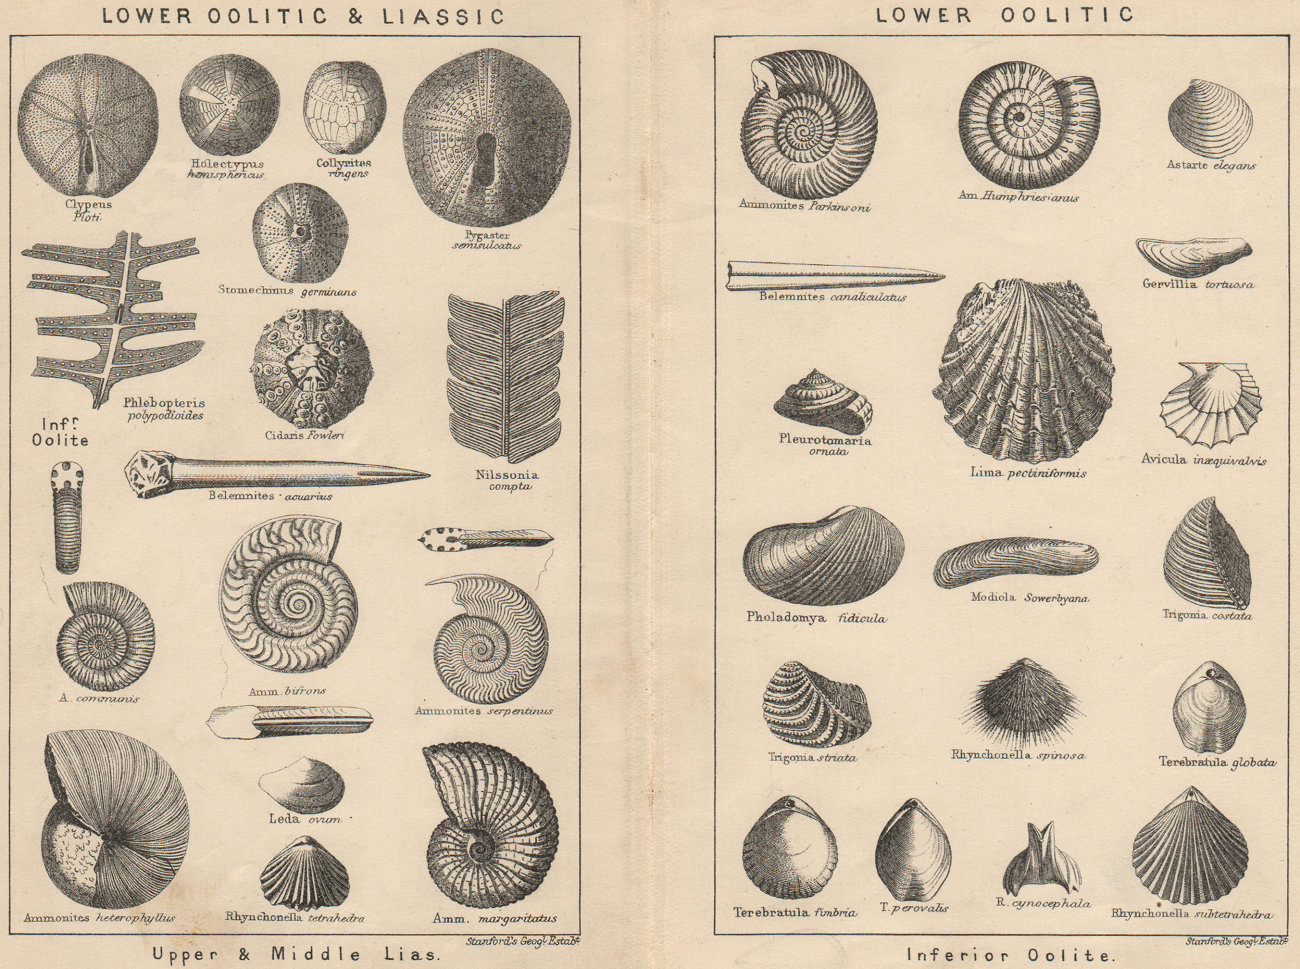 Associate Product BRITISH FOSSILS. Lower Oolitic & Liassic. Lower Oolitic. STANFORD 1913 print